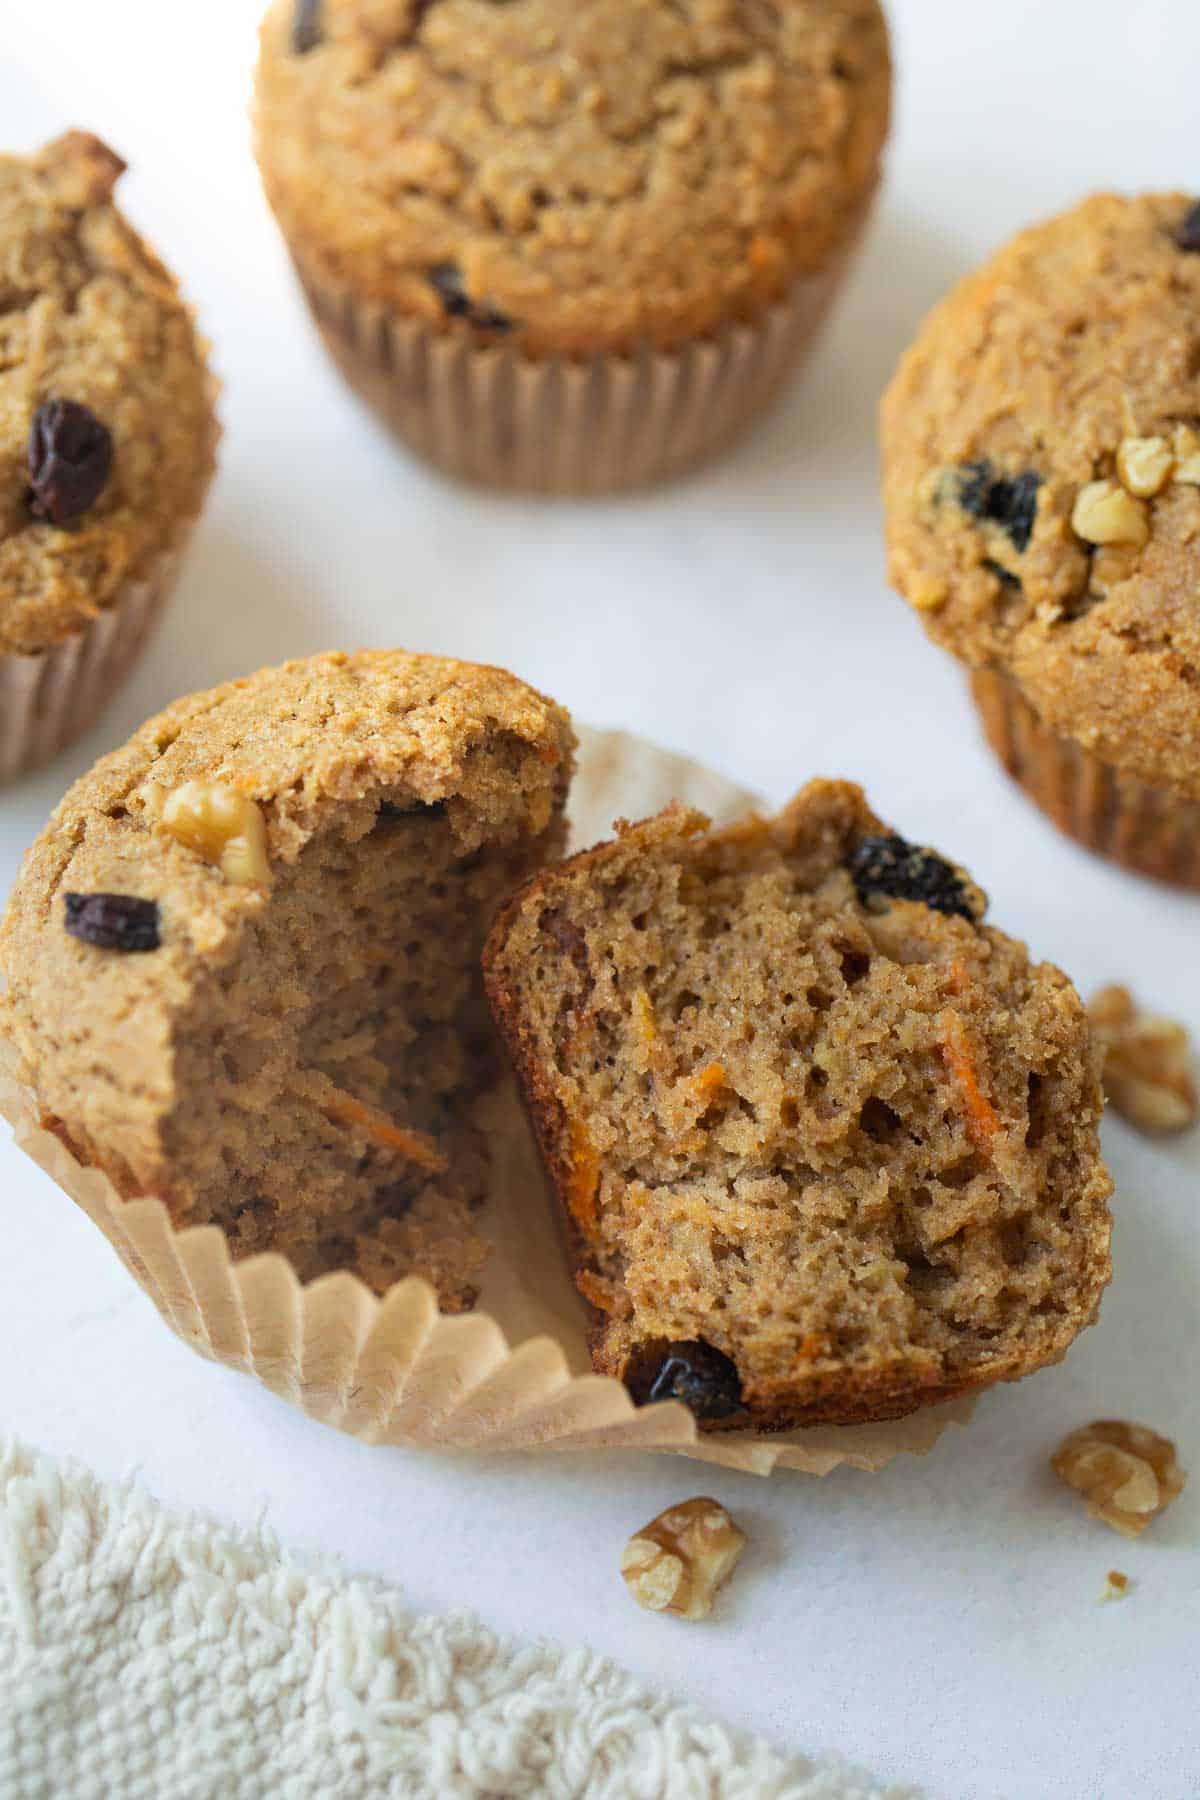 muffin cut in half with 3 muffins in background on white background